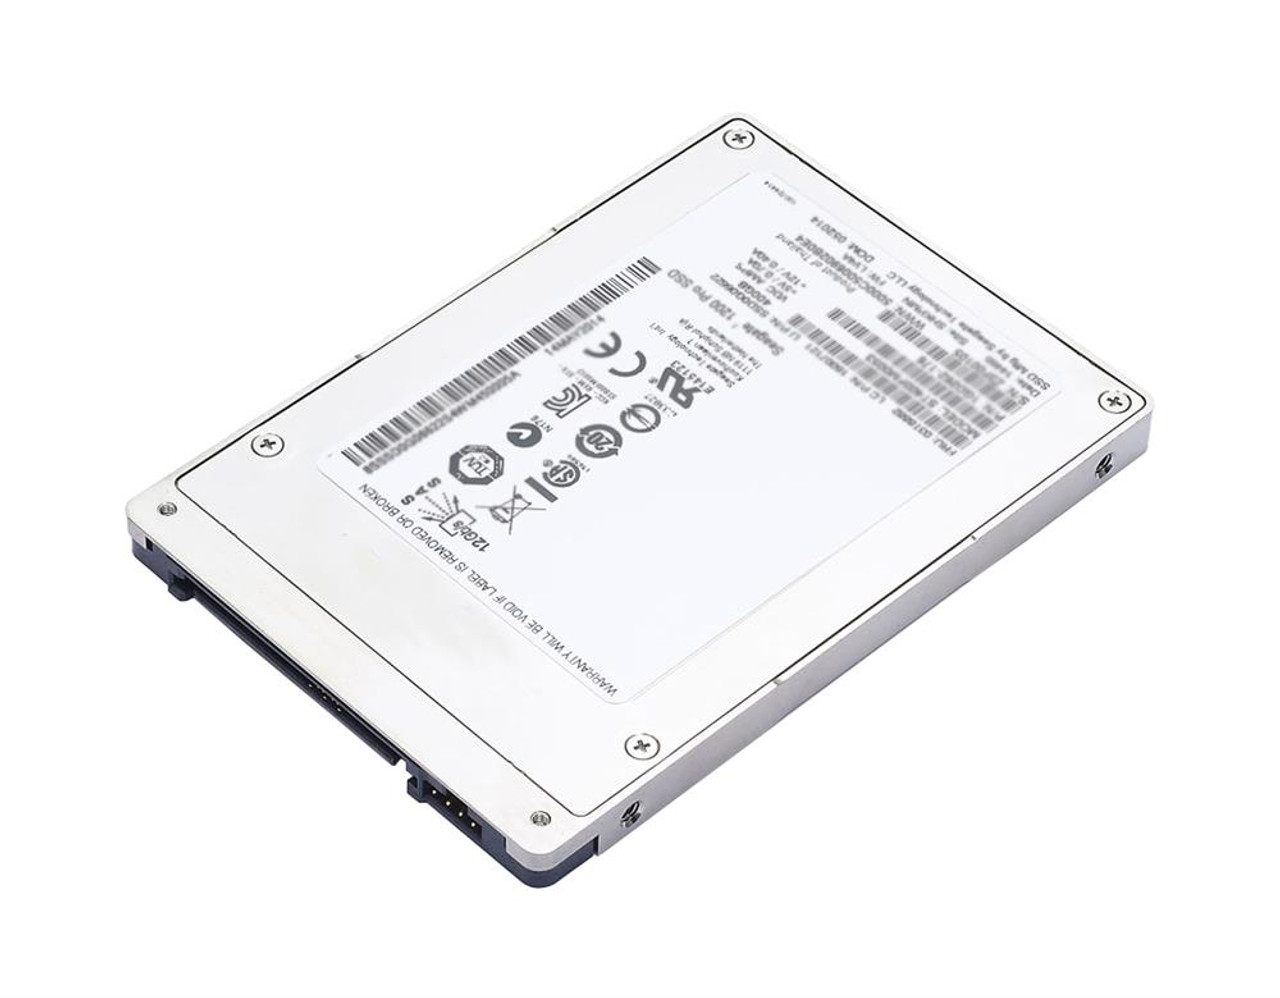 4XB0G80310 Lenovo 256GB MLC SATA 6Gbps 2.5-inch Internal Solid State Drive (SSD) for ThinkCentre M72e and M73